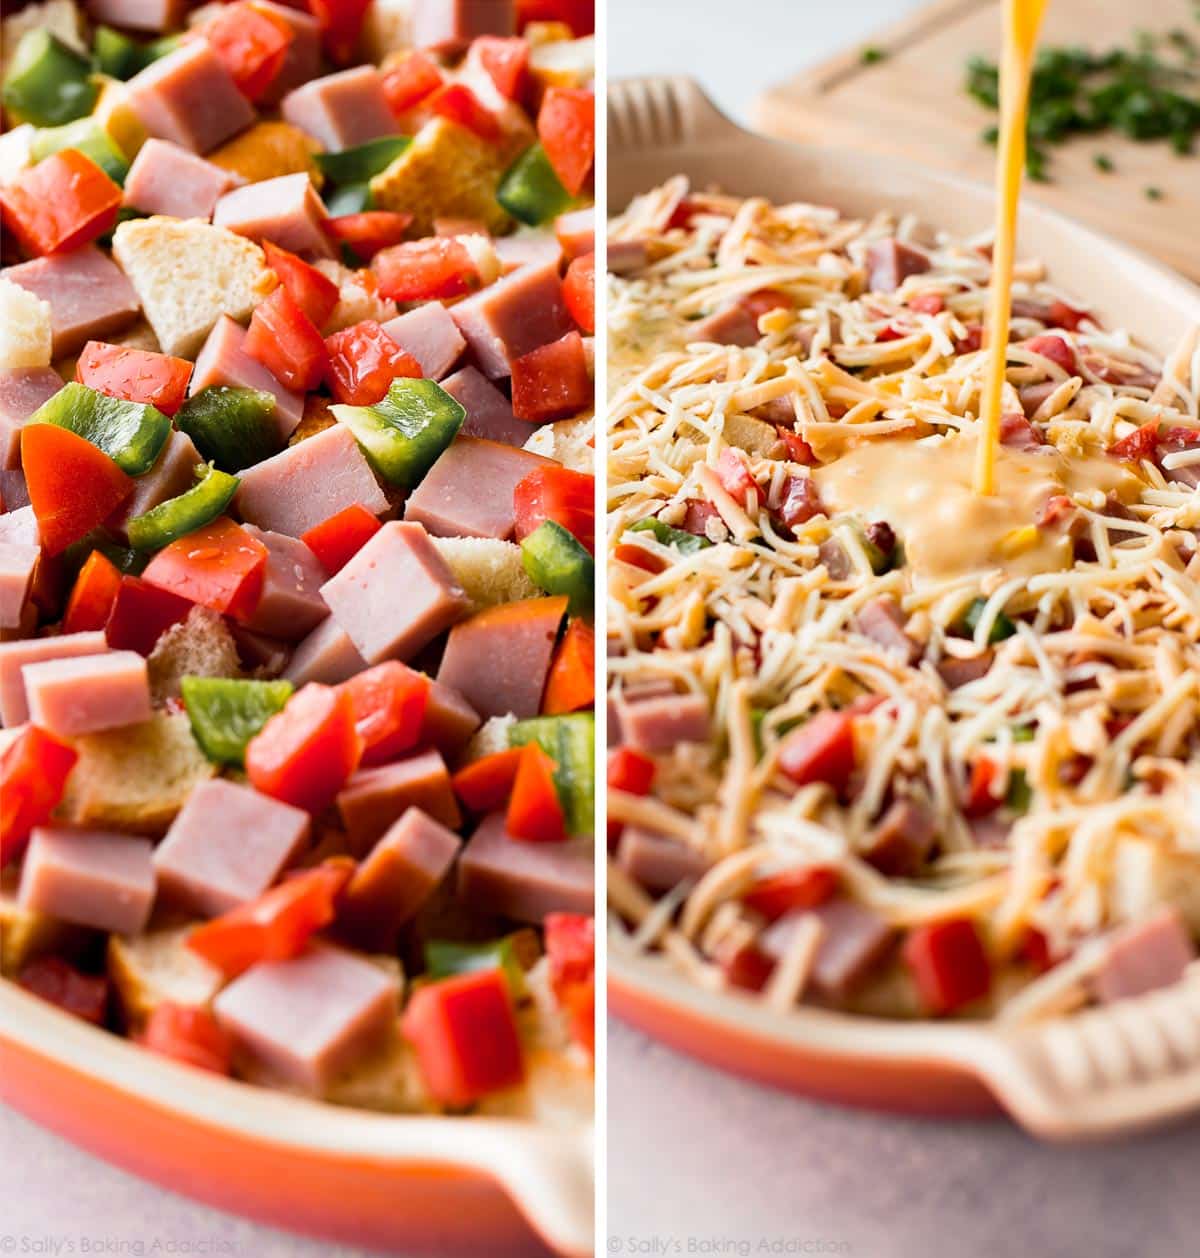 2 images of chopped vegetables and meat in a casserole dish and pouring egg mixture on top of ingredients in a casserole dish